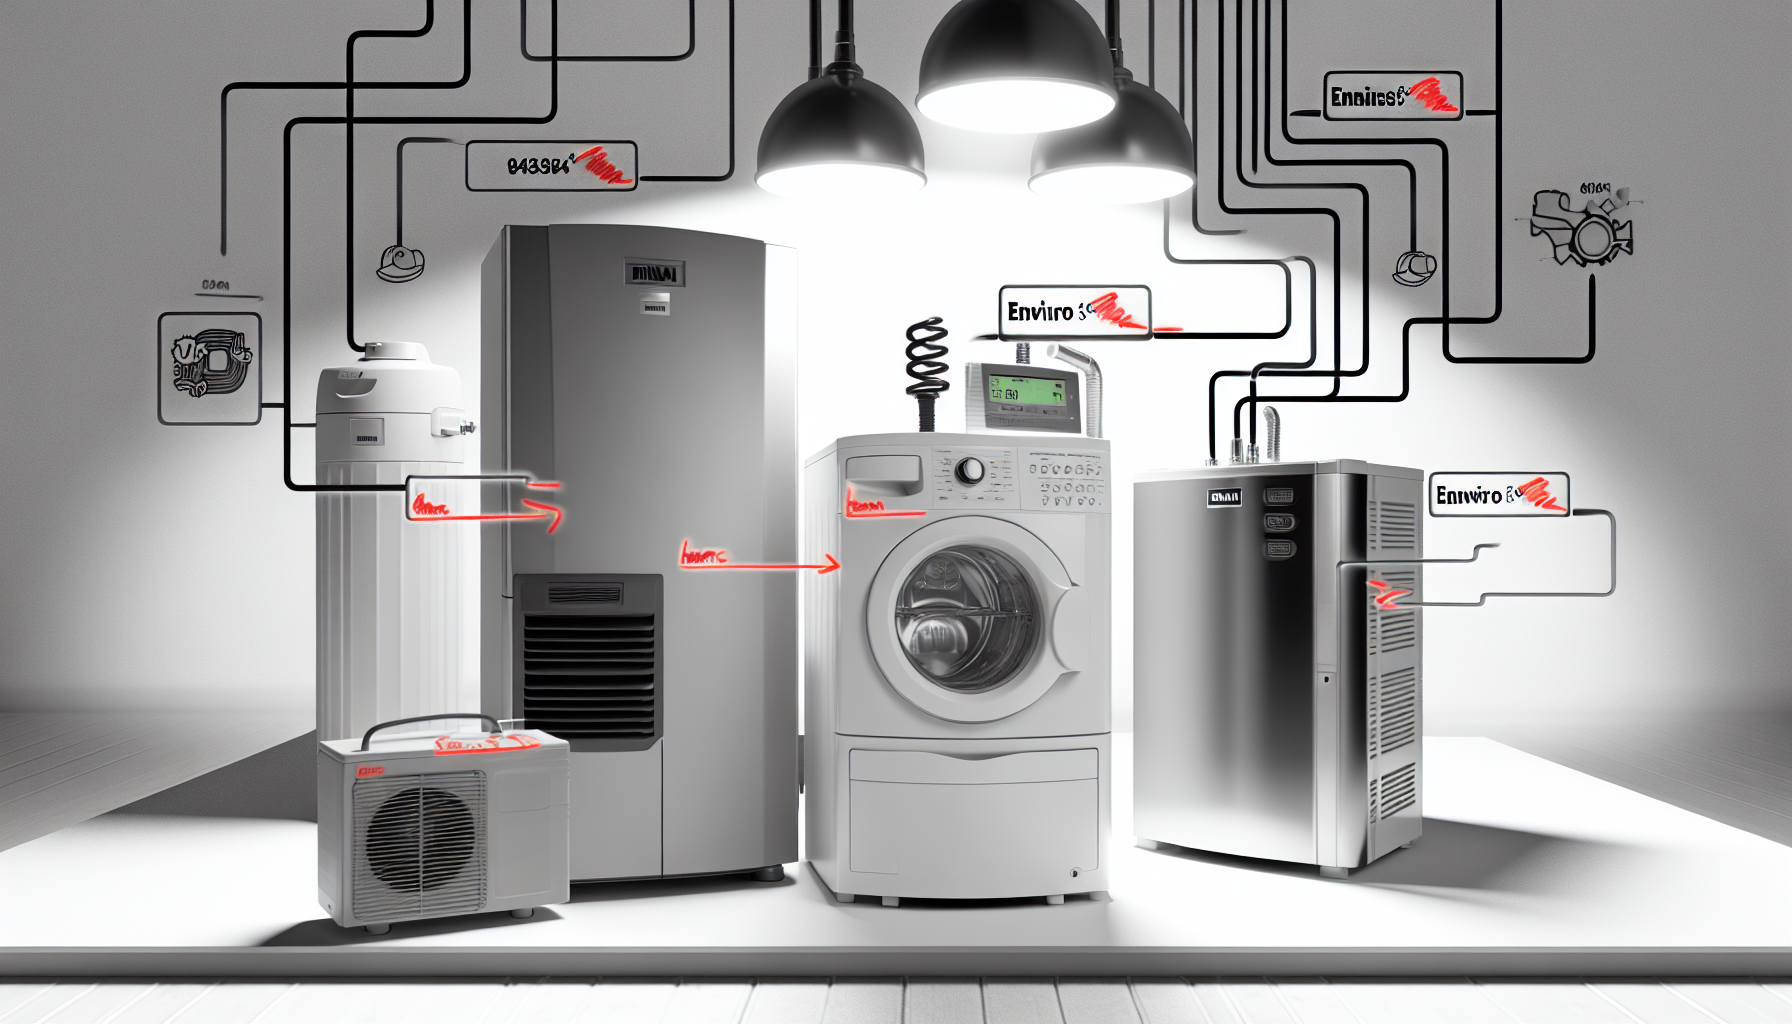 Comparing Rinnai Enviro Series with other Rinnai products